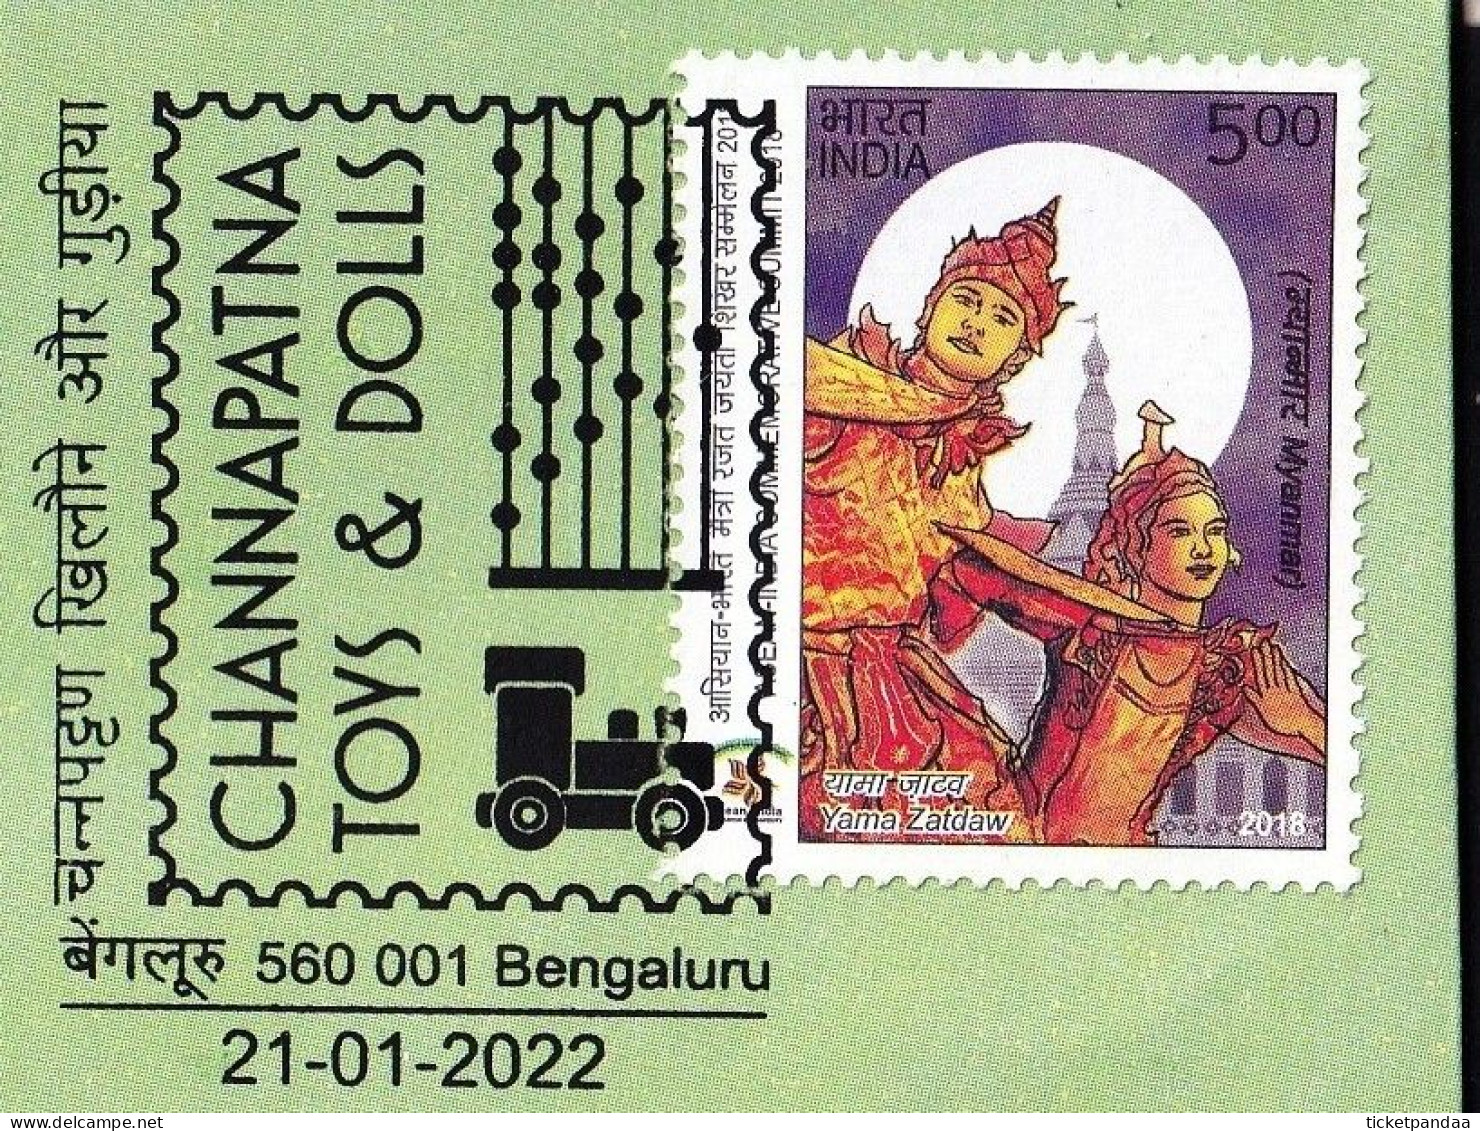 TOYS AND DOLLS- CHANNAPATNA TOYS - PICTORIAL POSTMARK- SPECIAL COVER-INDIA-BX4-31 - Puppets